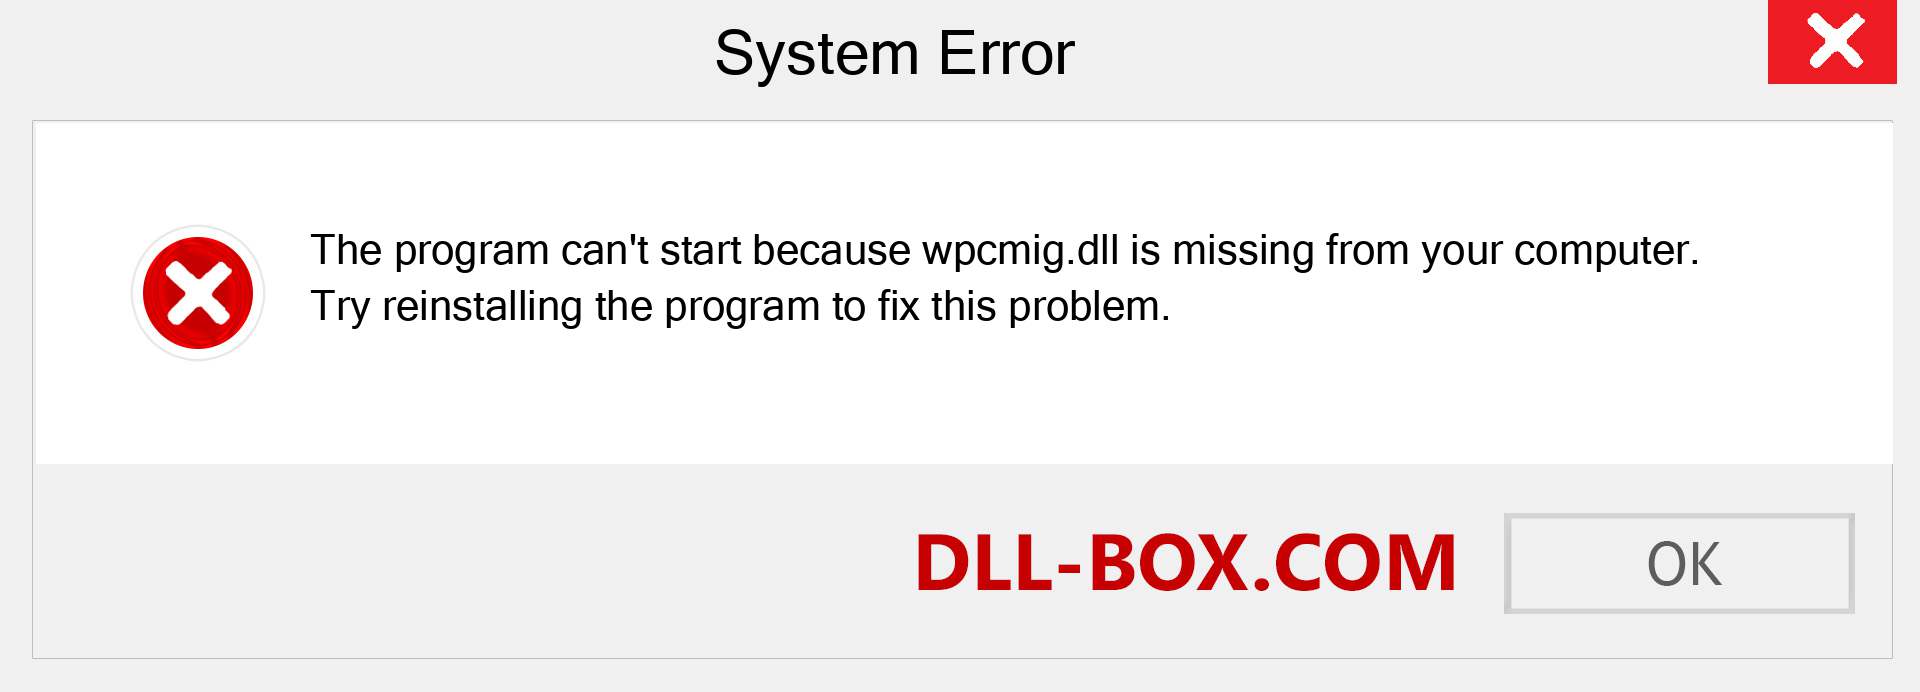  wpcmig.dll file is missing?. Download for Windows 7, 8, 10 - Fix  wpcmig dll Missing Error on Windows, photos, images